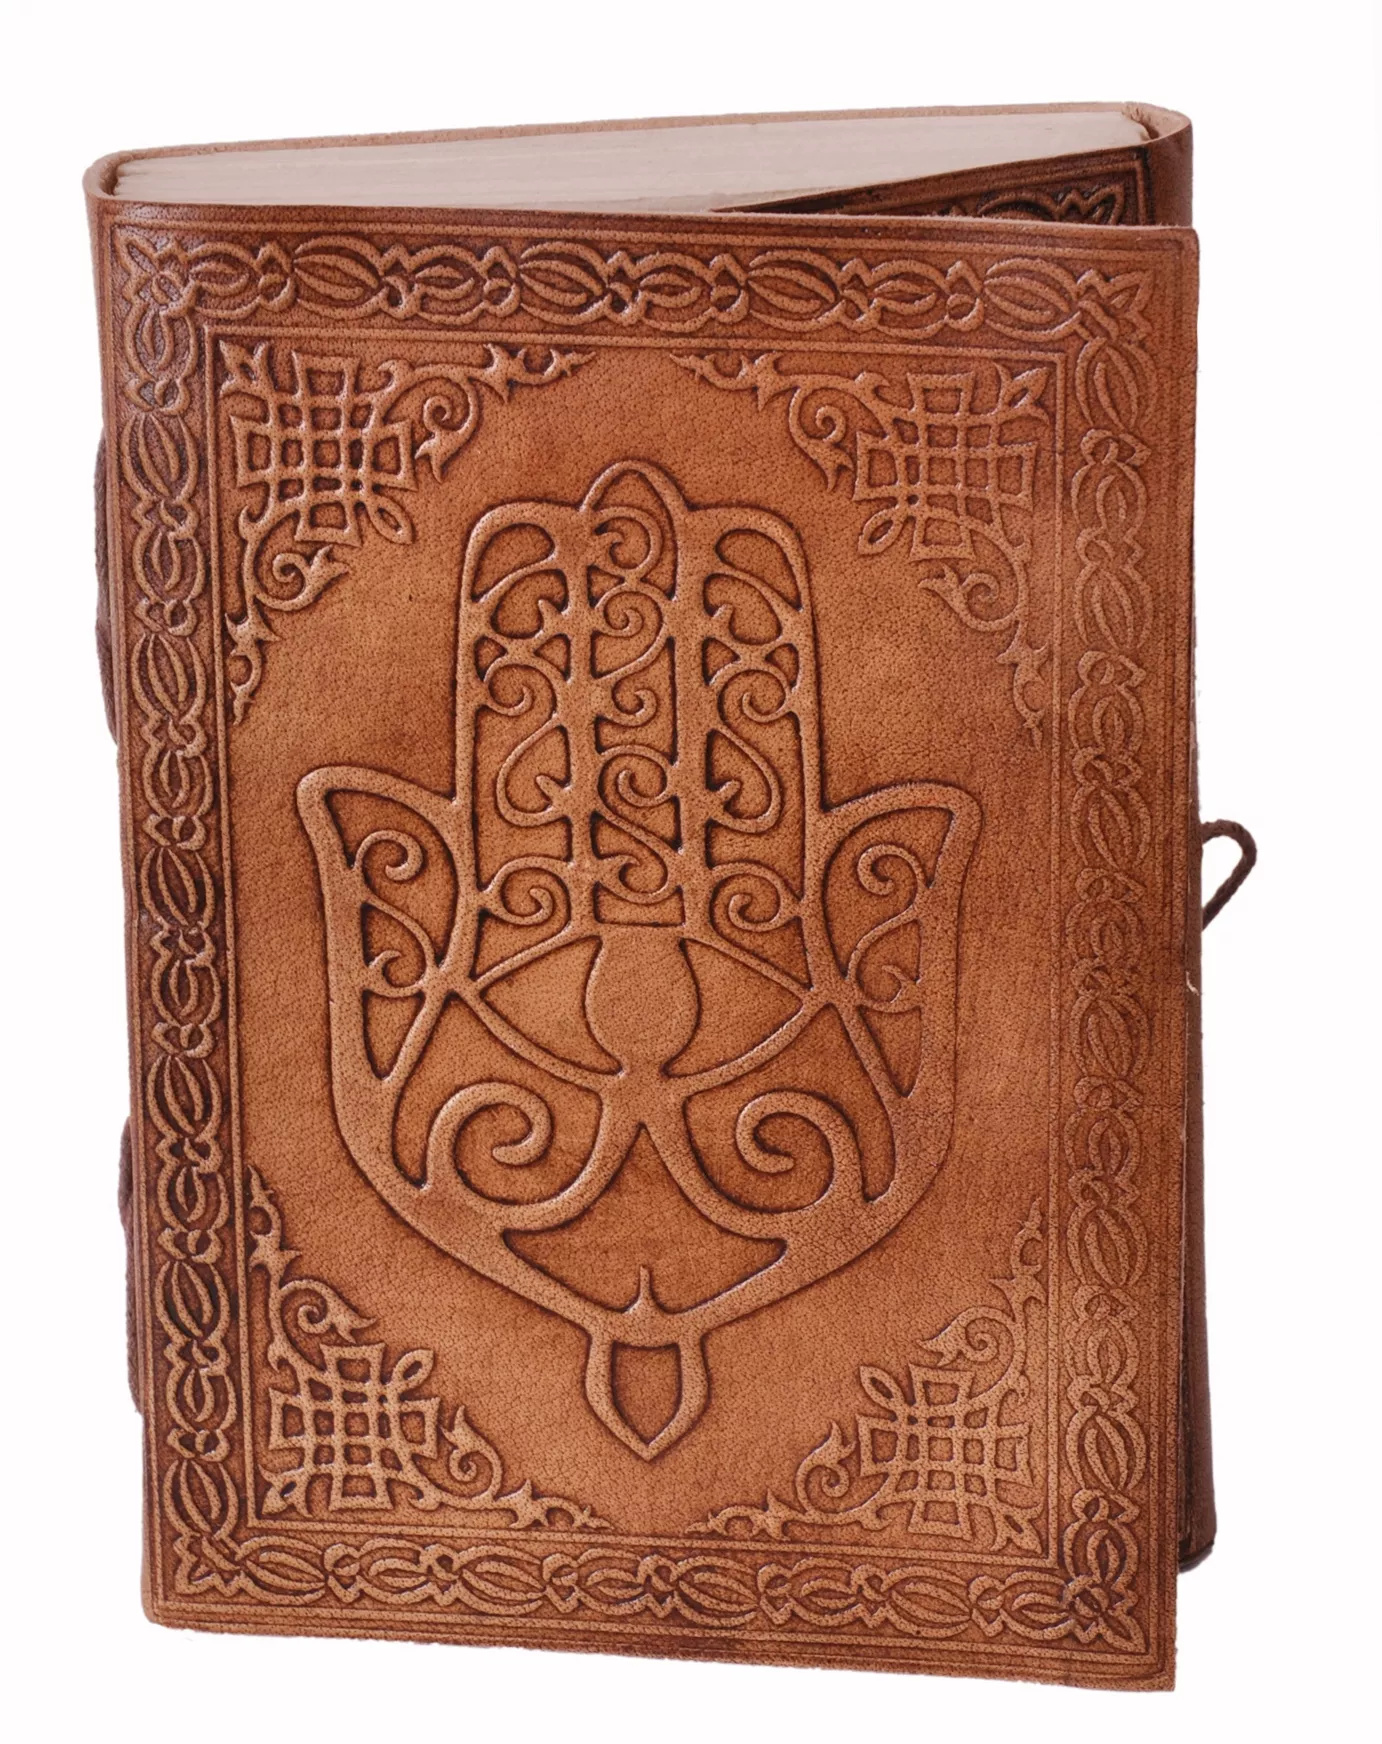 Leather Journal Diary Notebook Hand Of God Handmade Paper In Leather Cover For Corporate Gift Or Personal Memoir